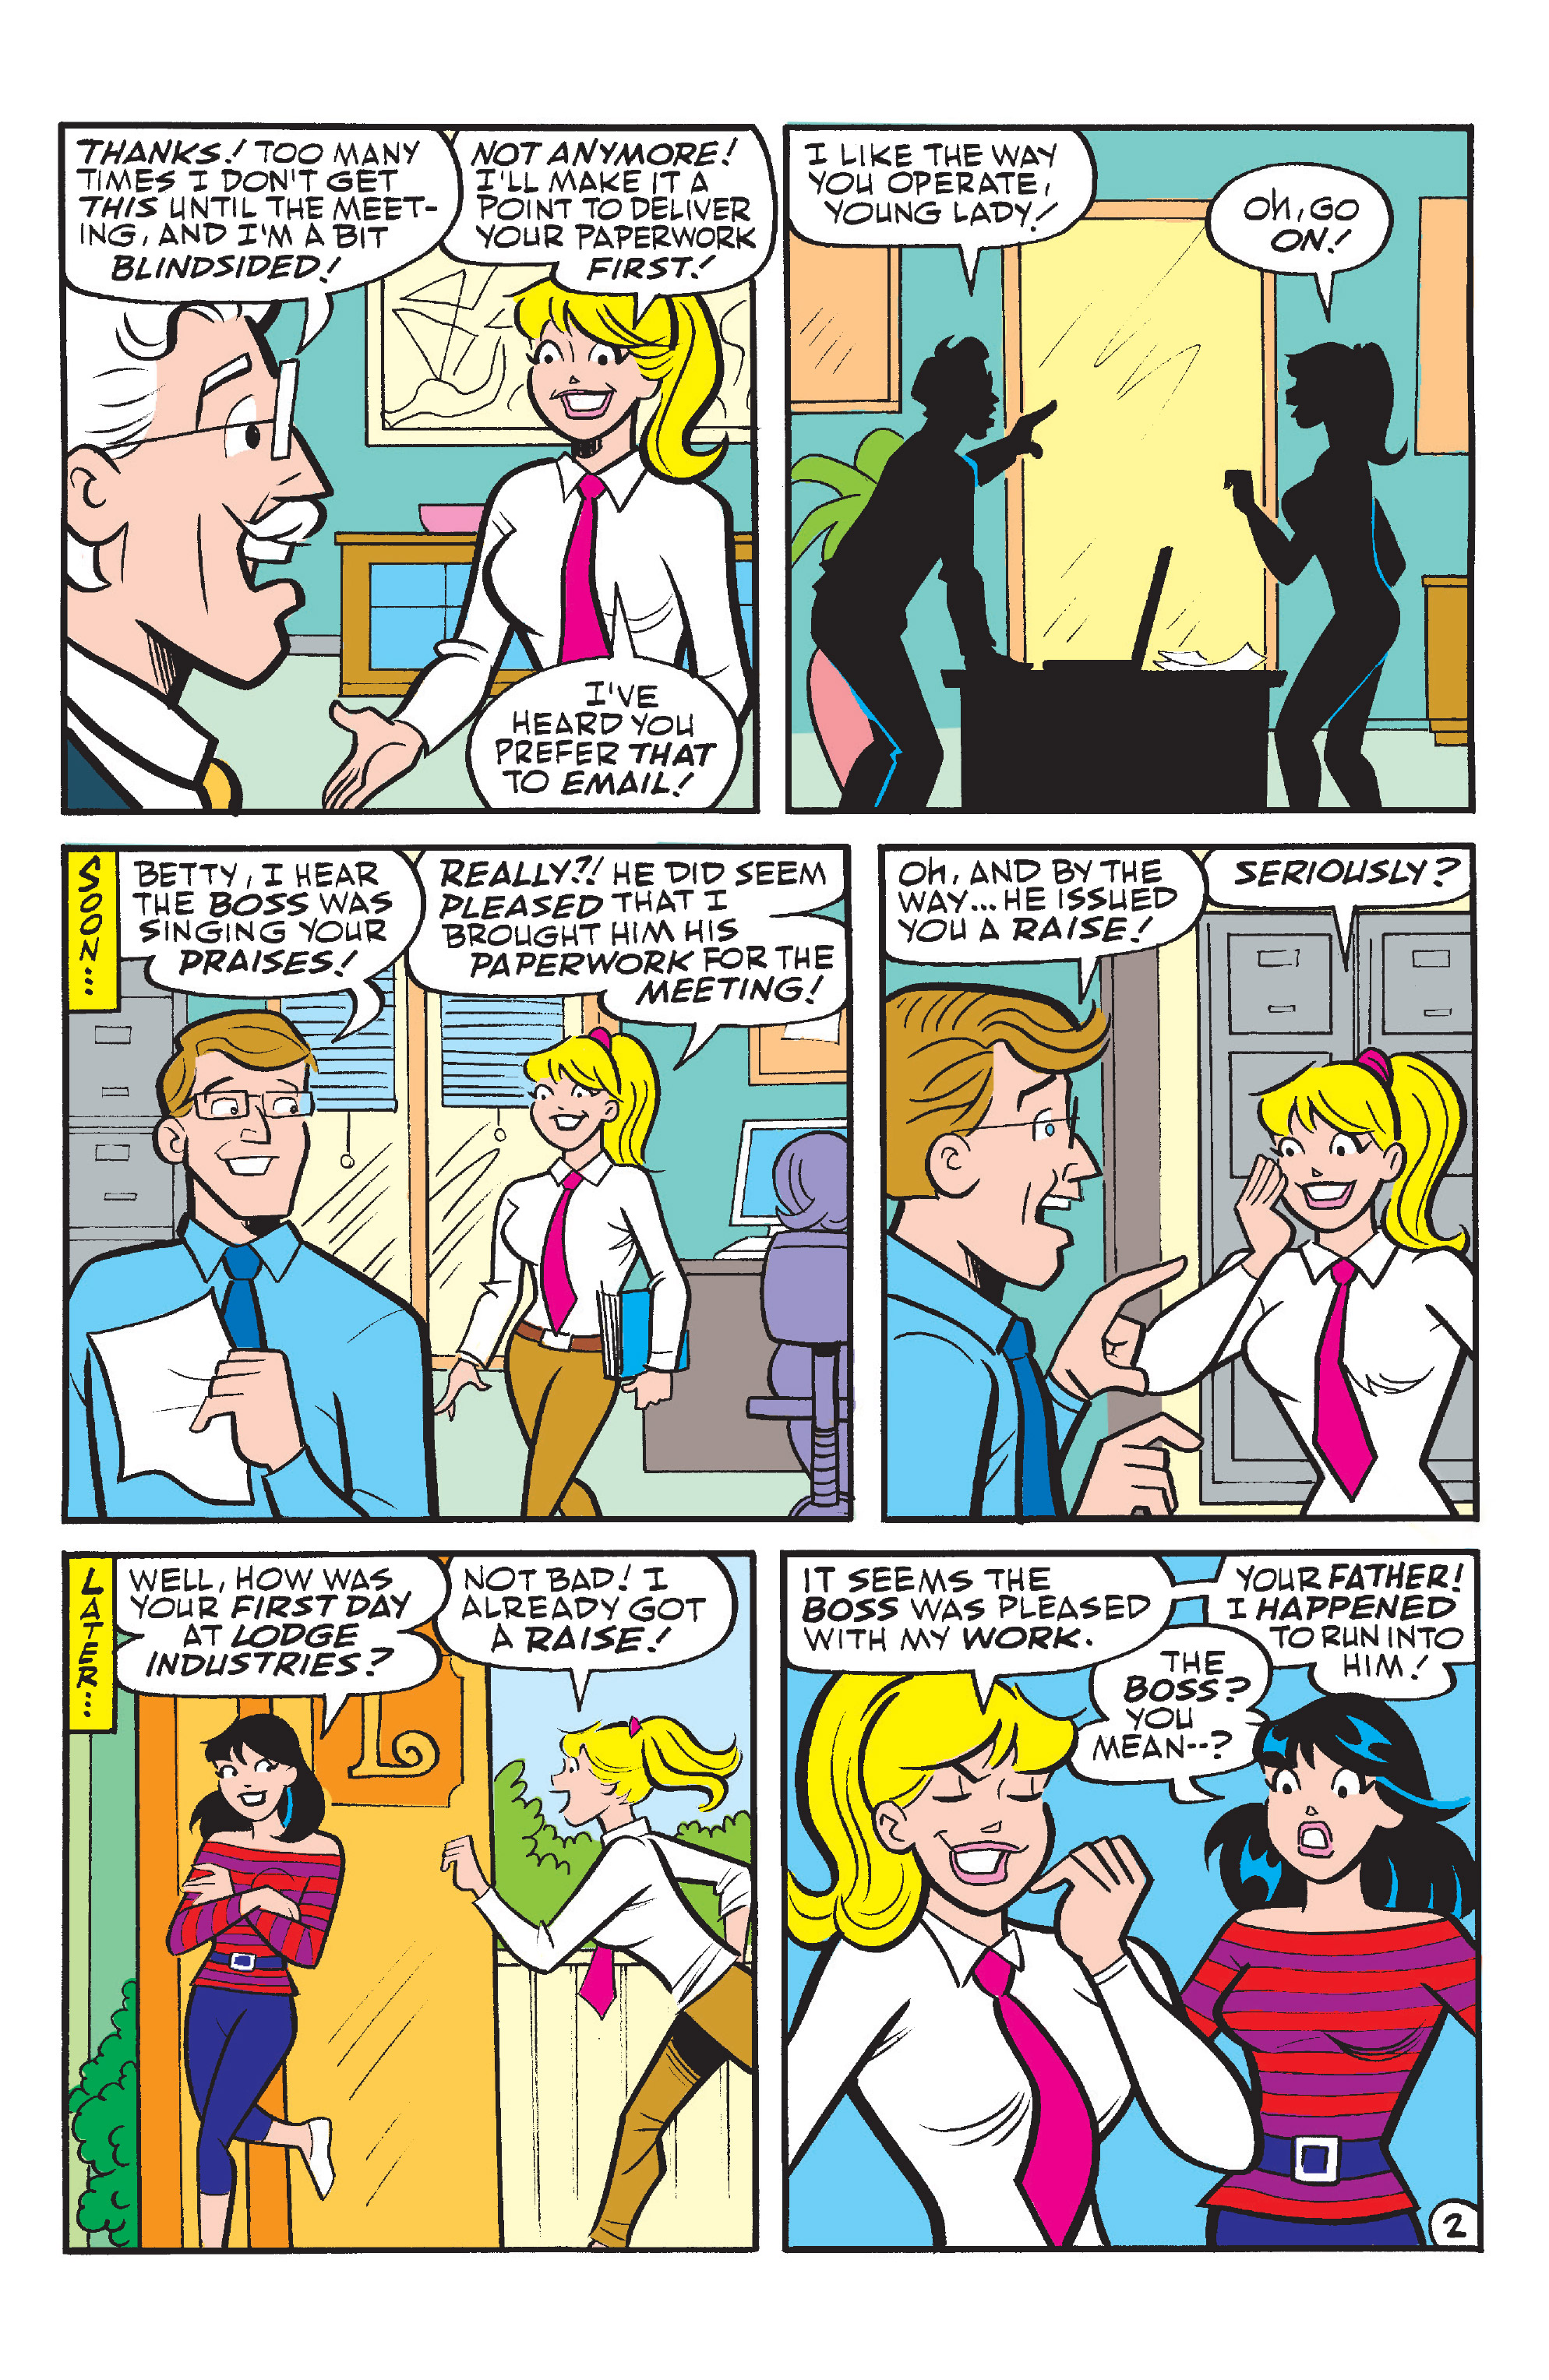 Betty & Veronica Friends Forever: Go To Work (2019): Chapter 1 - Page 4